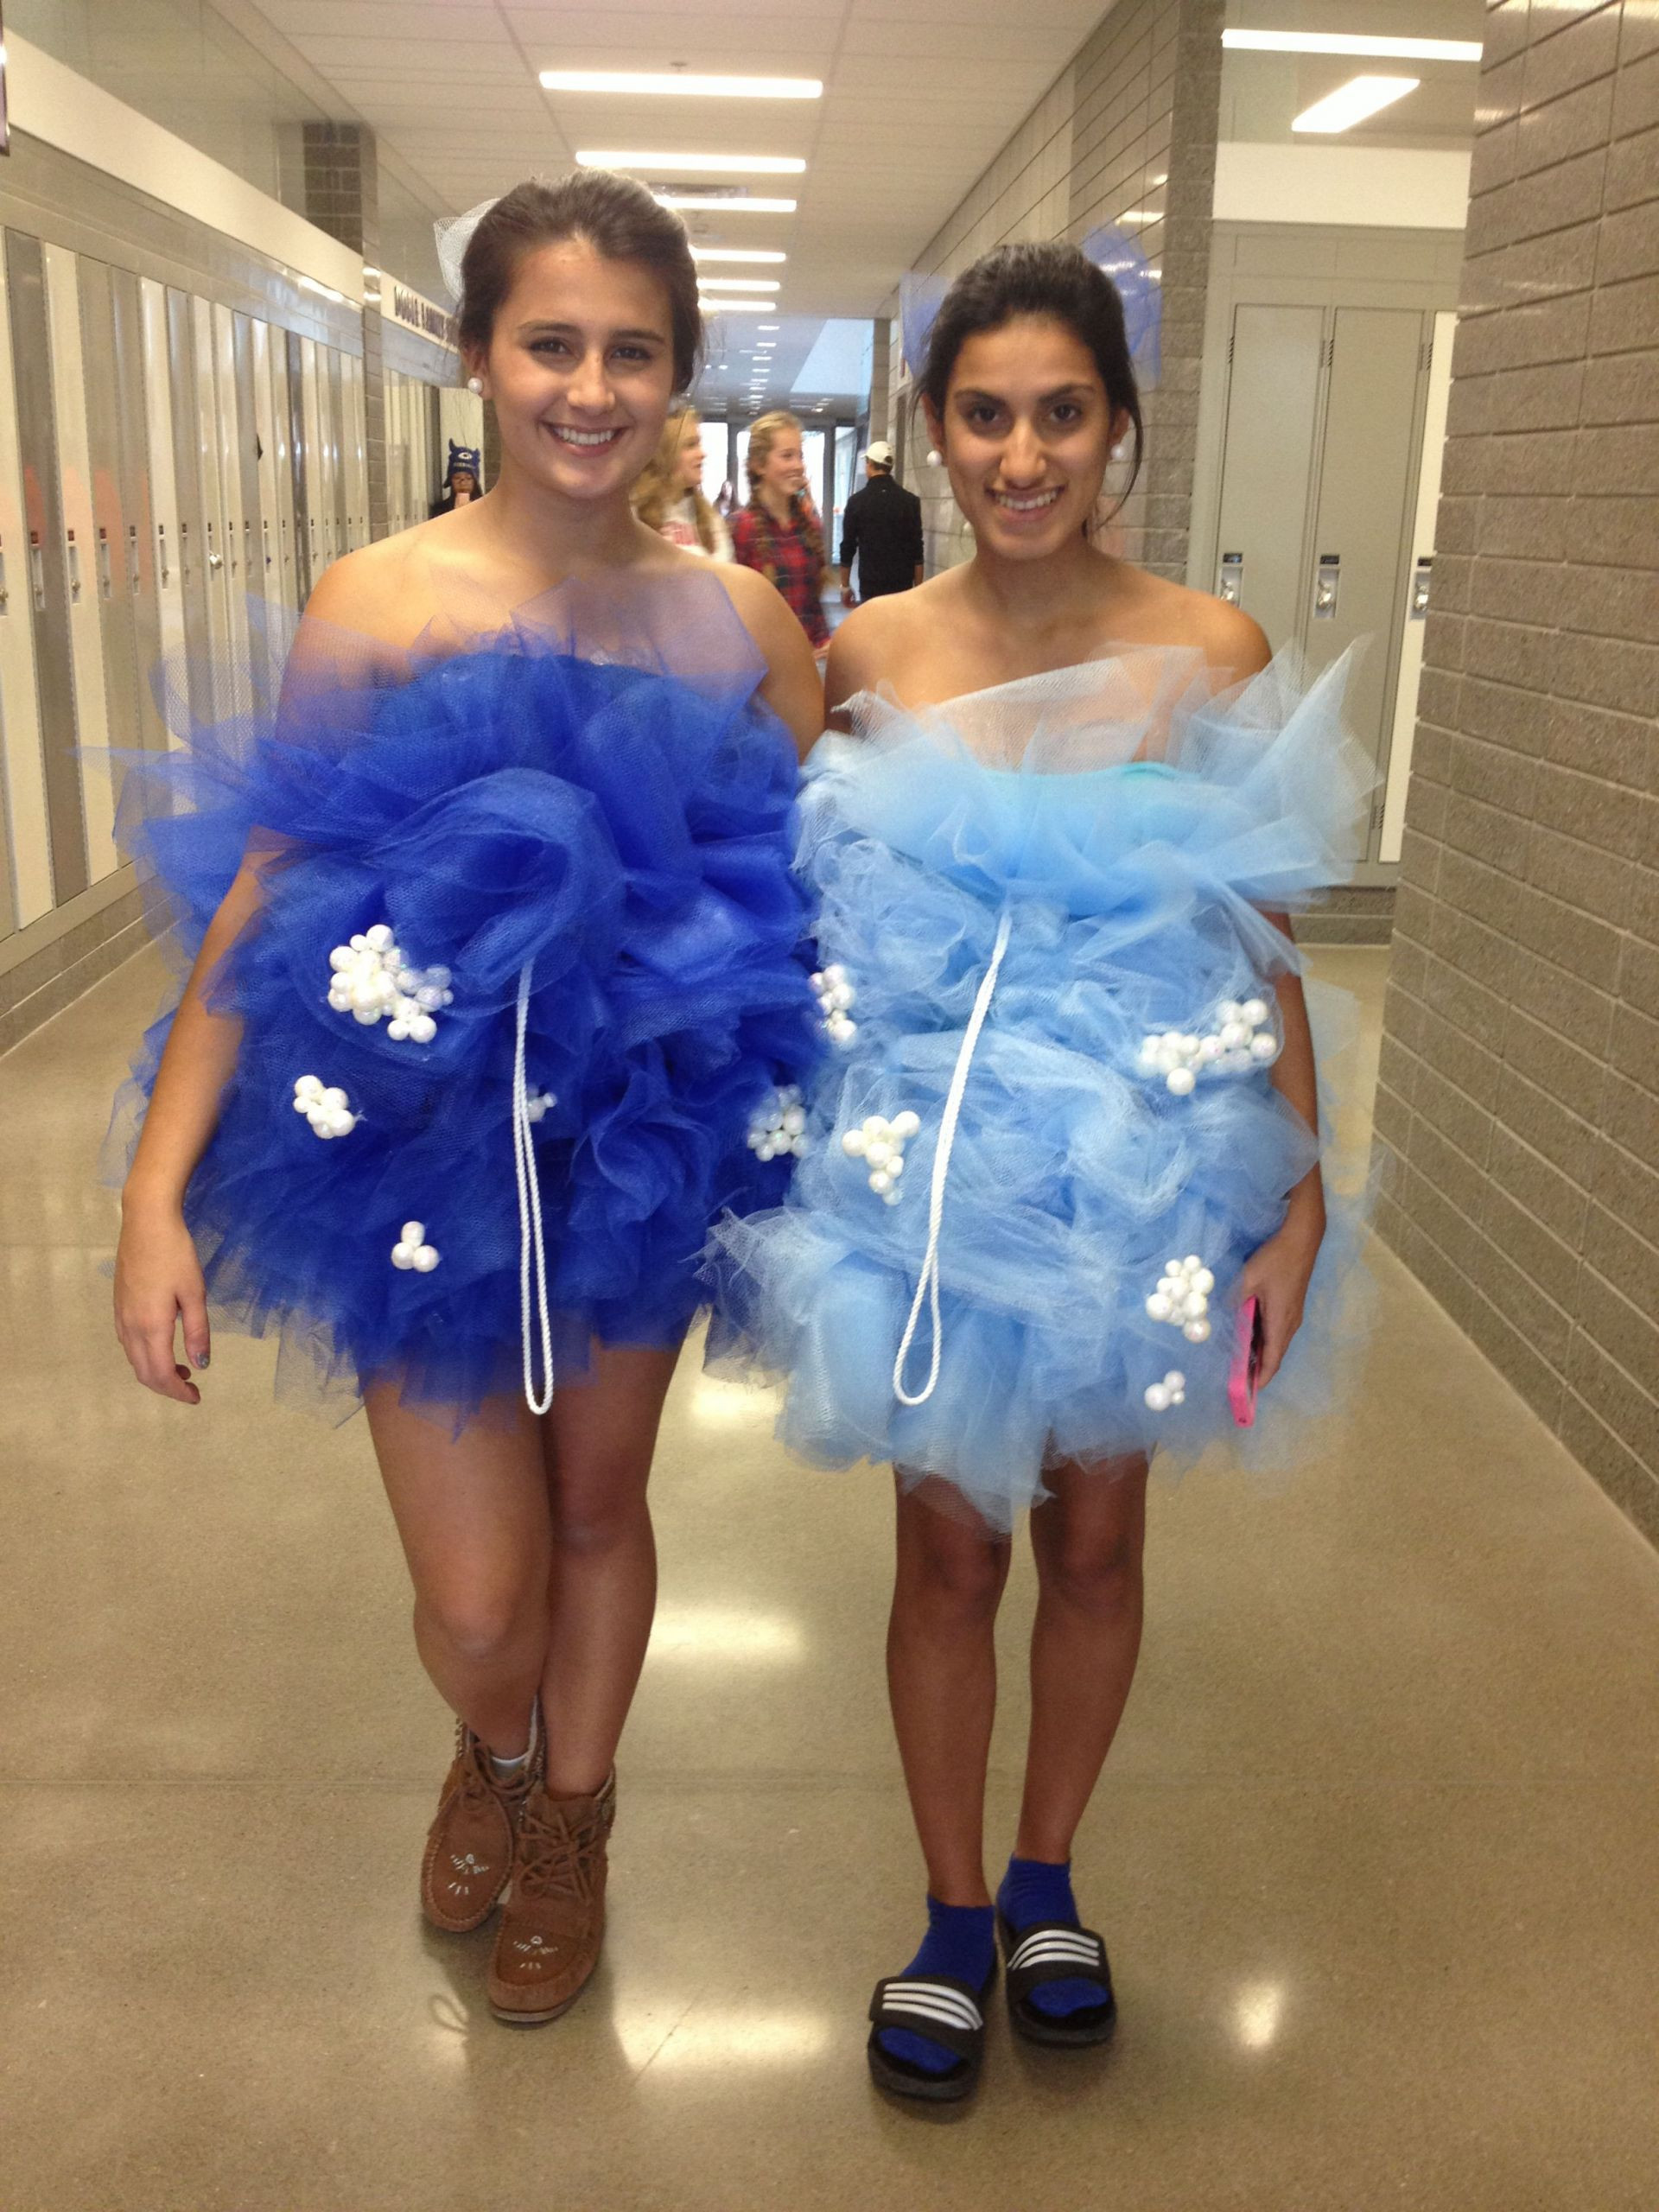 Loofah Costume DIY
 The 35 Best Ideas for Diy Loofah Costume Home Family